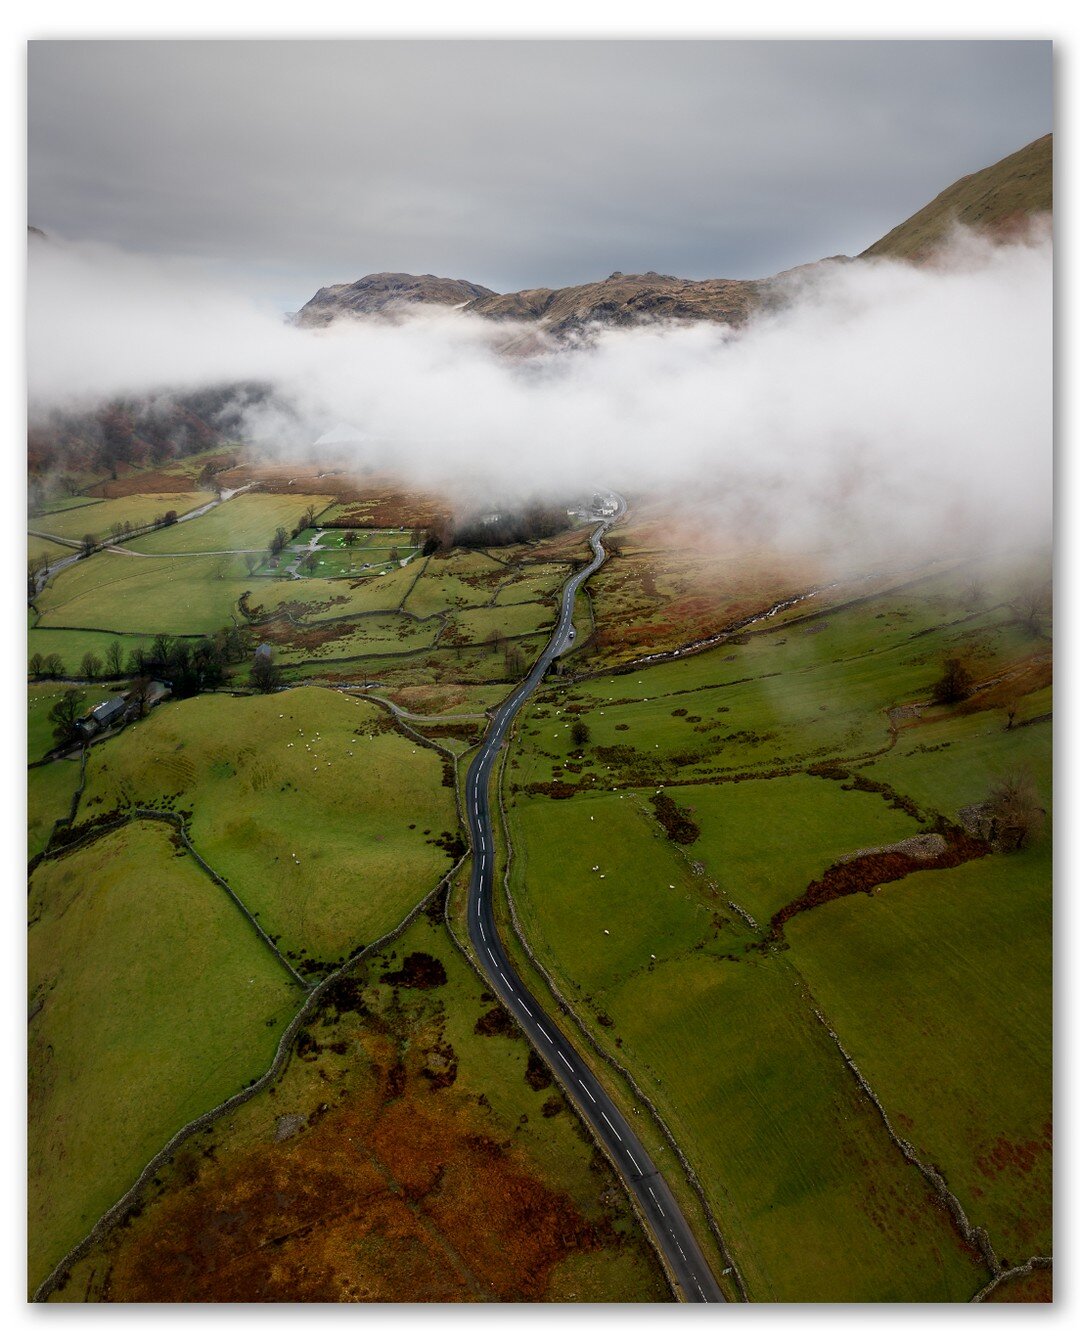 The Kirkstone pass - I'm back home after a fun filled week in the Lake District. The weather was so-so for much of the week. It didn't really rain, but it didn't really do anything interesting, so it felt like a continuation of the past 3 months of d